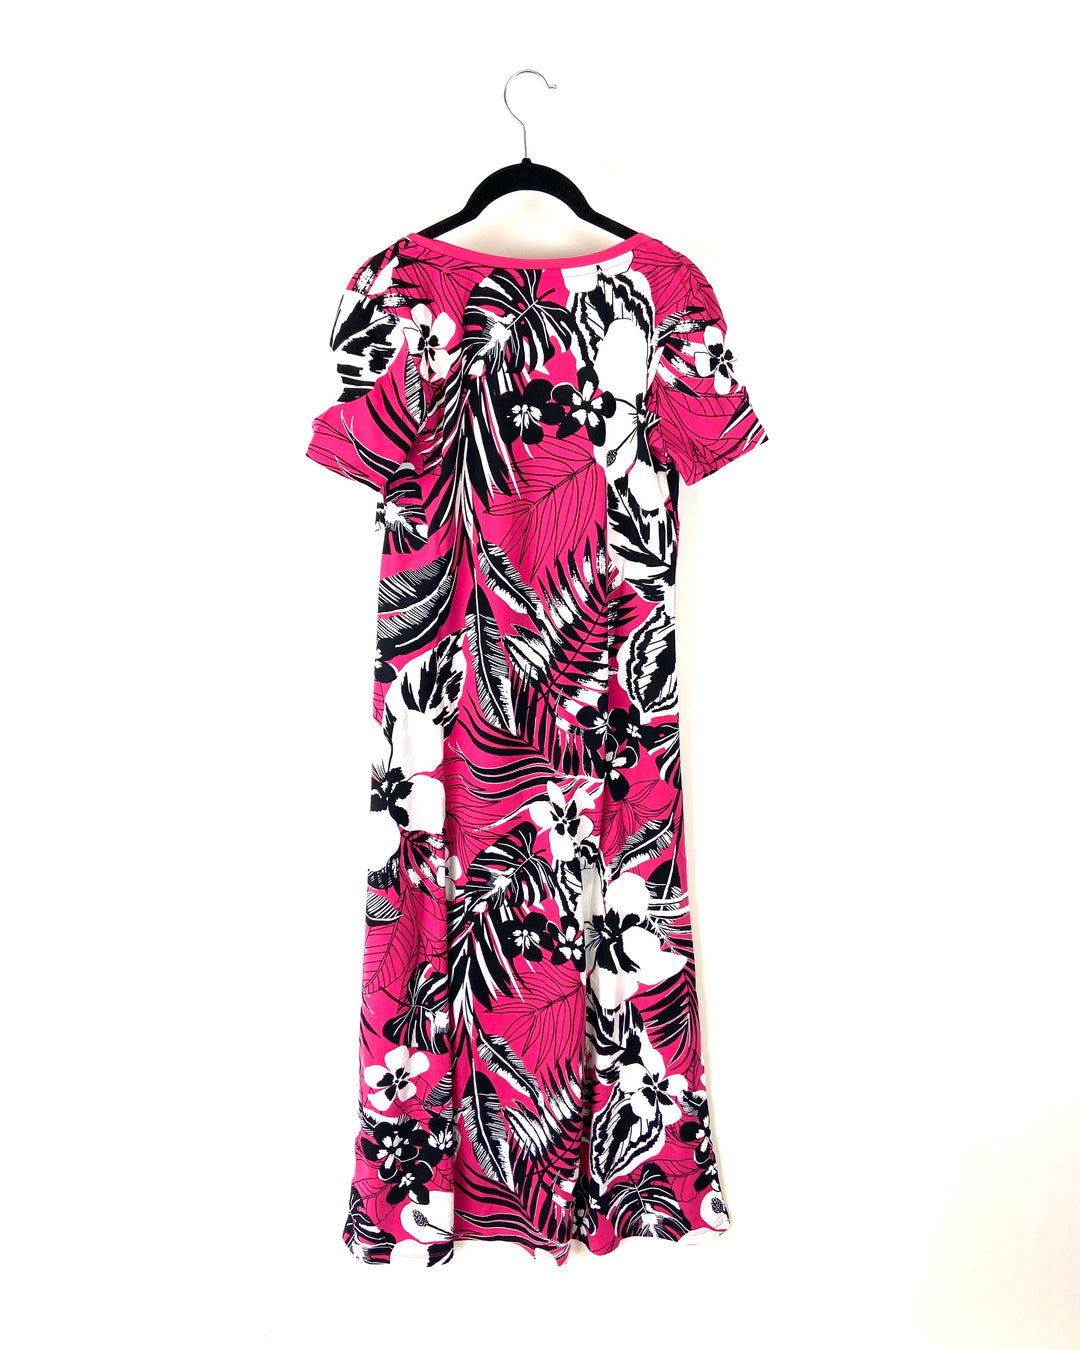 Pink, Black and White Floral Maxi Dress - Medium And 1X